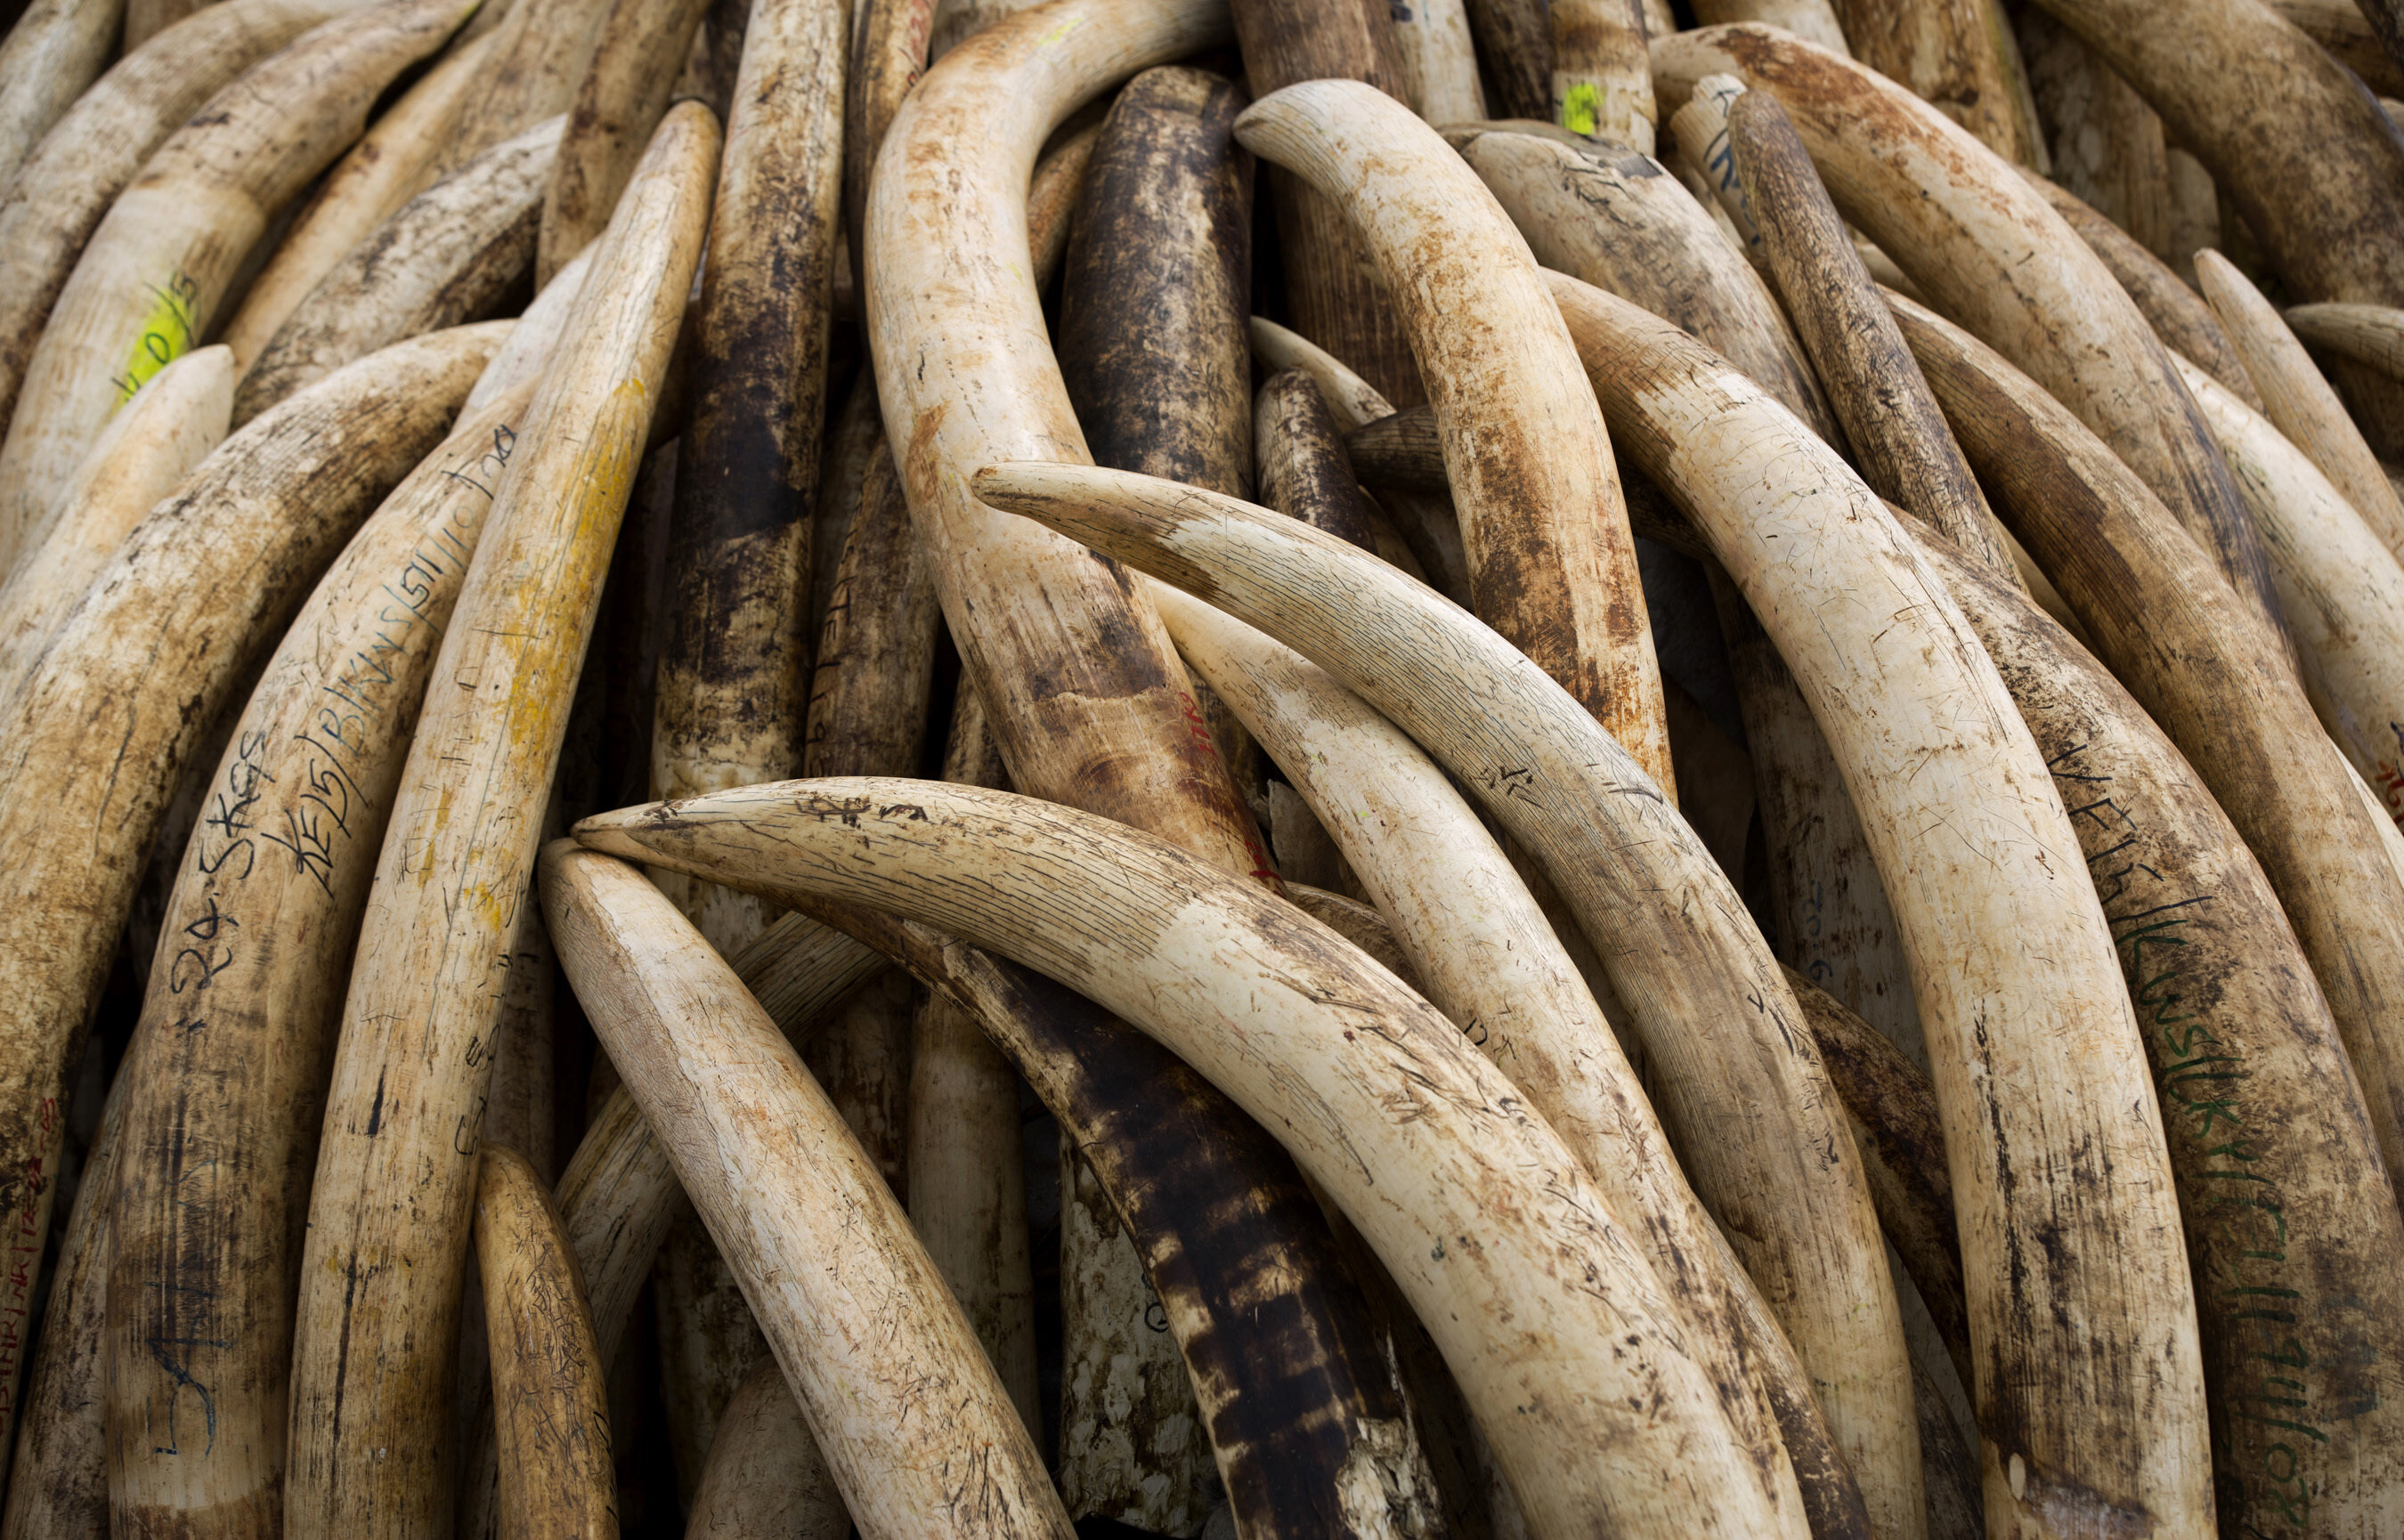 #DNA analysis of elephant ivory reveals trafficking networks